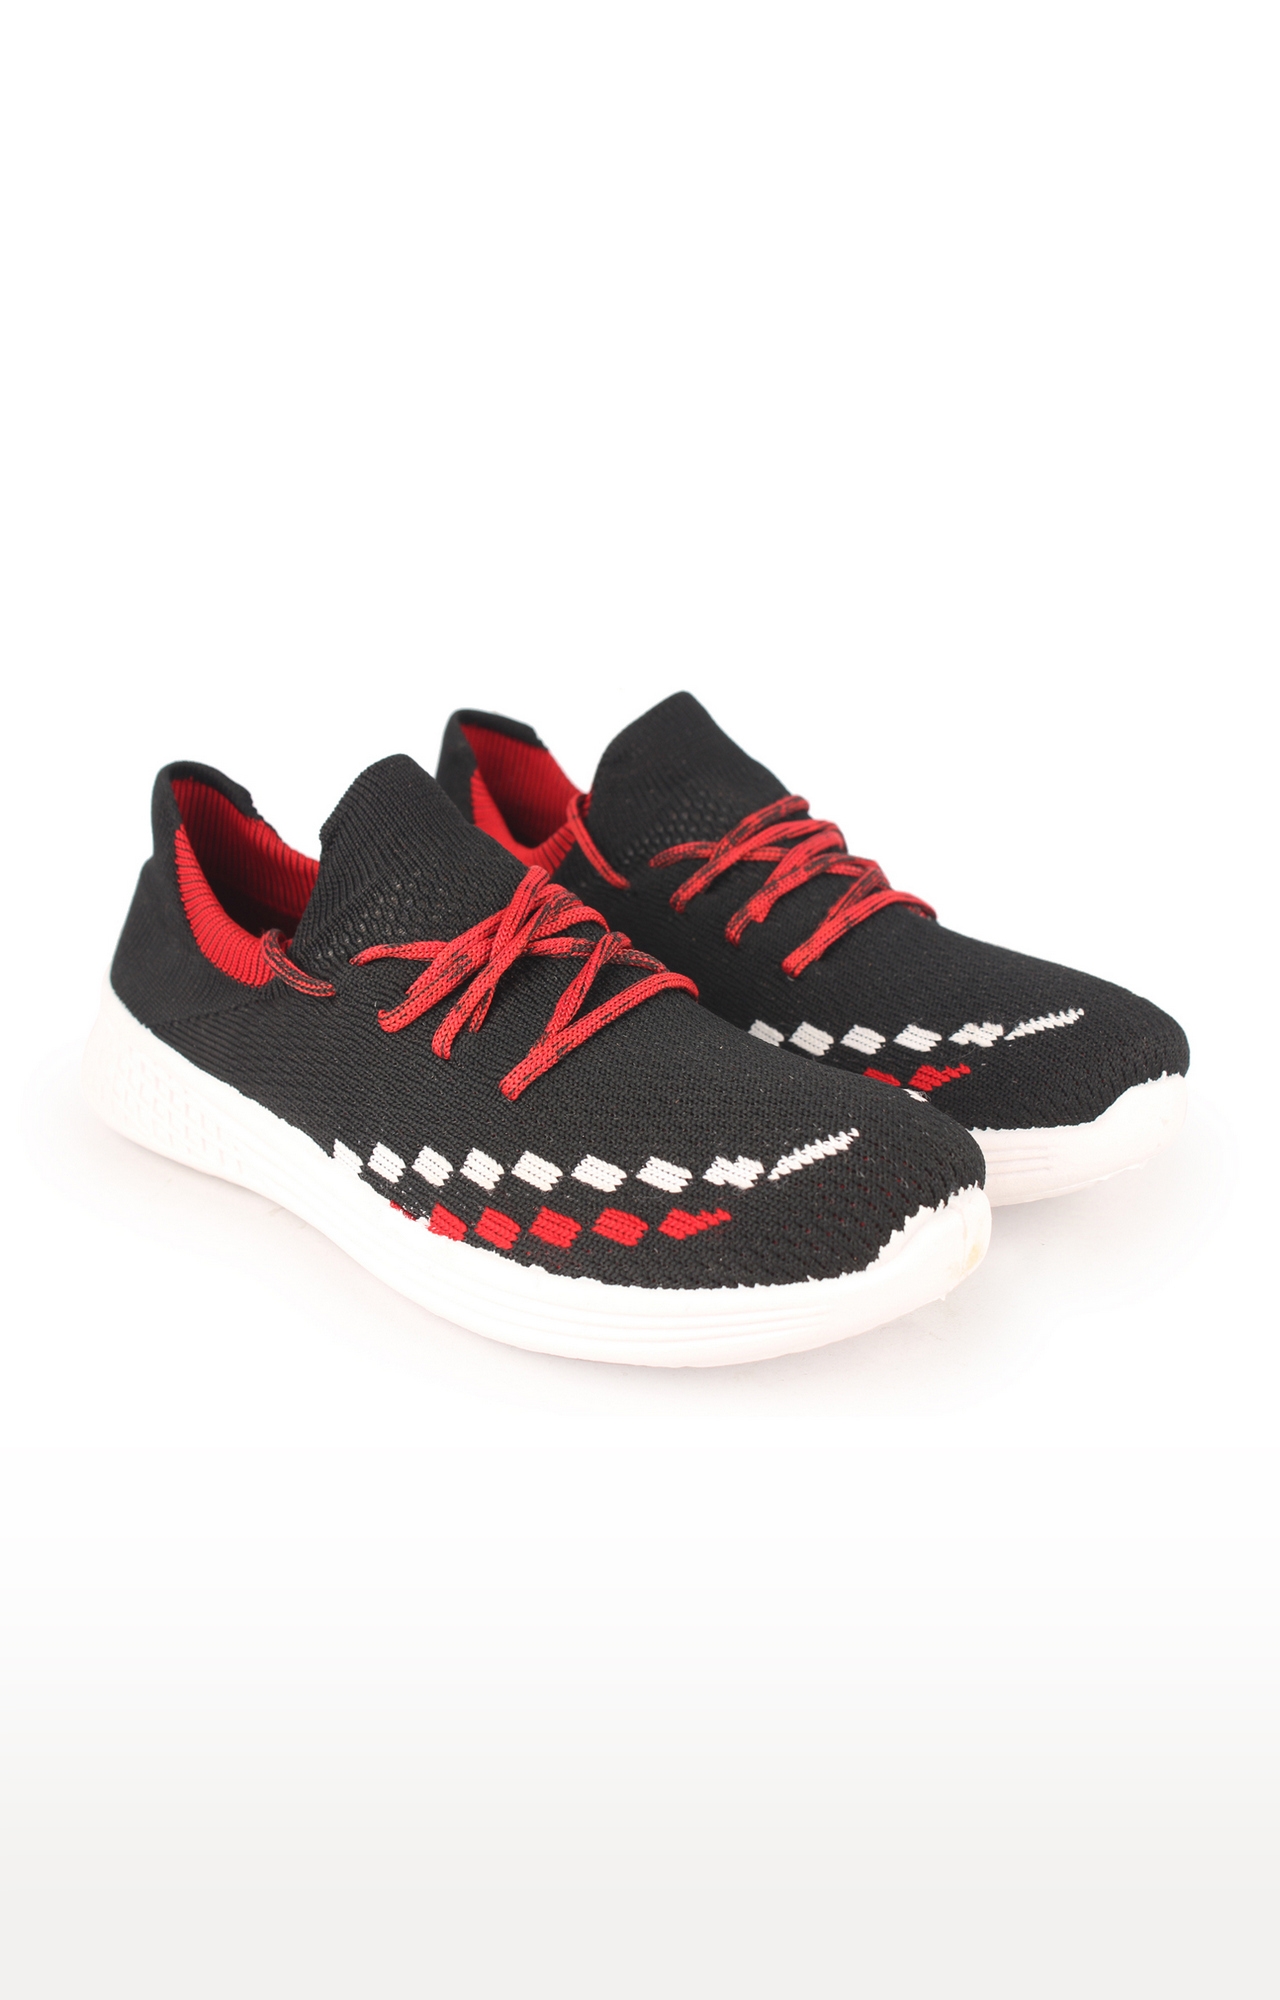 RNT LSS 01 Black and Red Shoes for Women